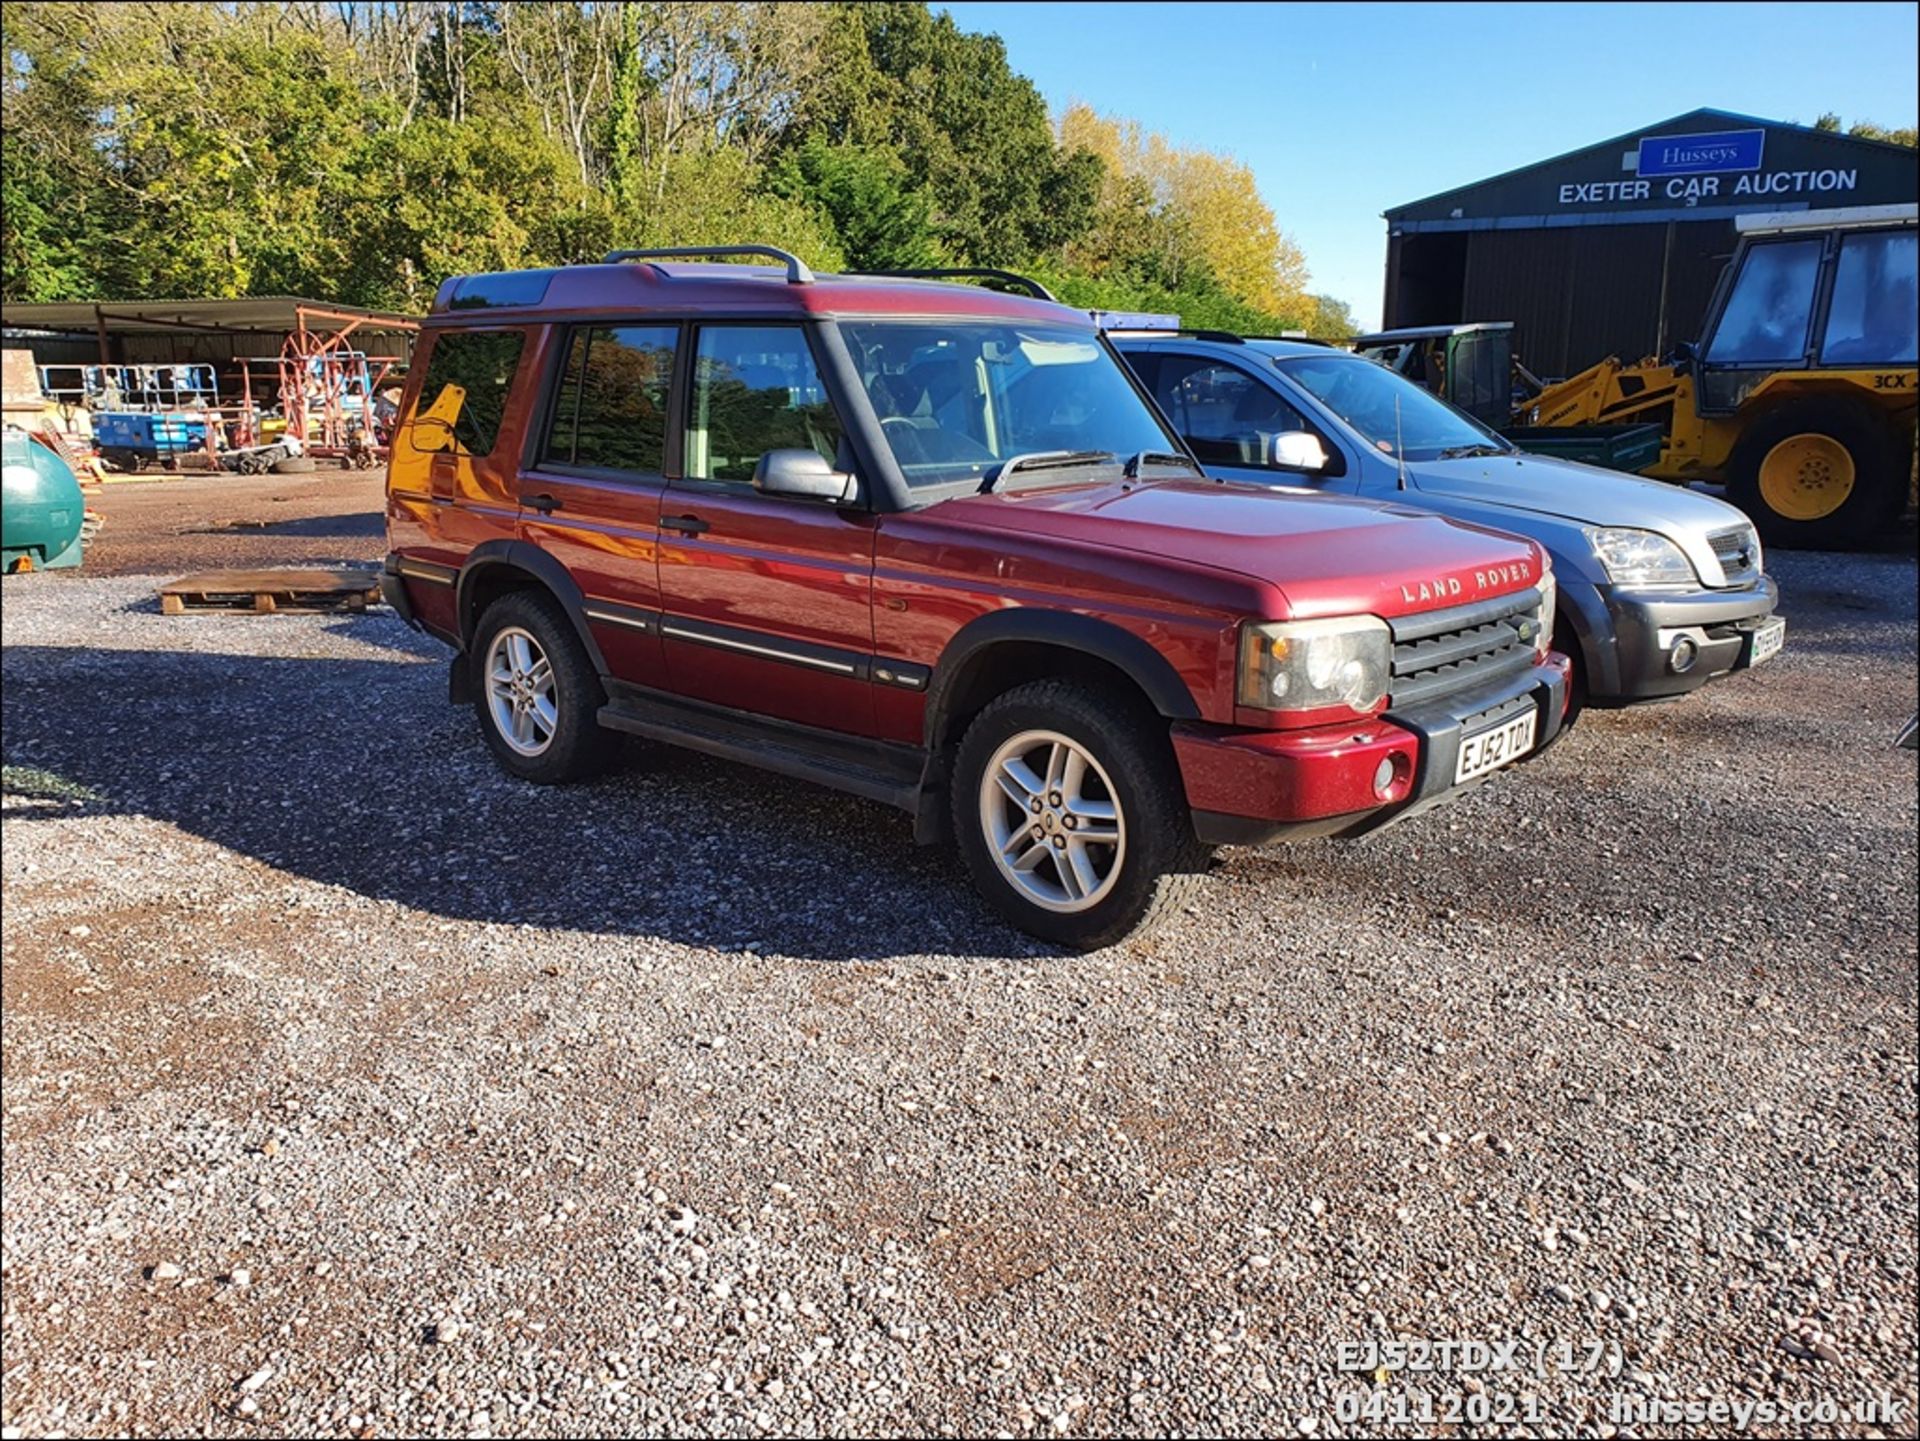 03/52 LAND ROVER DISCOVERY TD5 XS AUTO - 2495cc 5dr Estate (Red, 152k) - Image 17 of 18